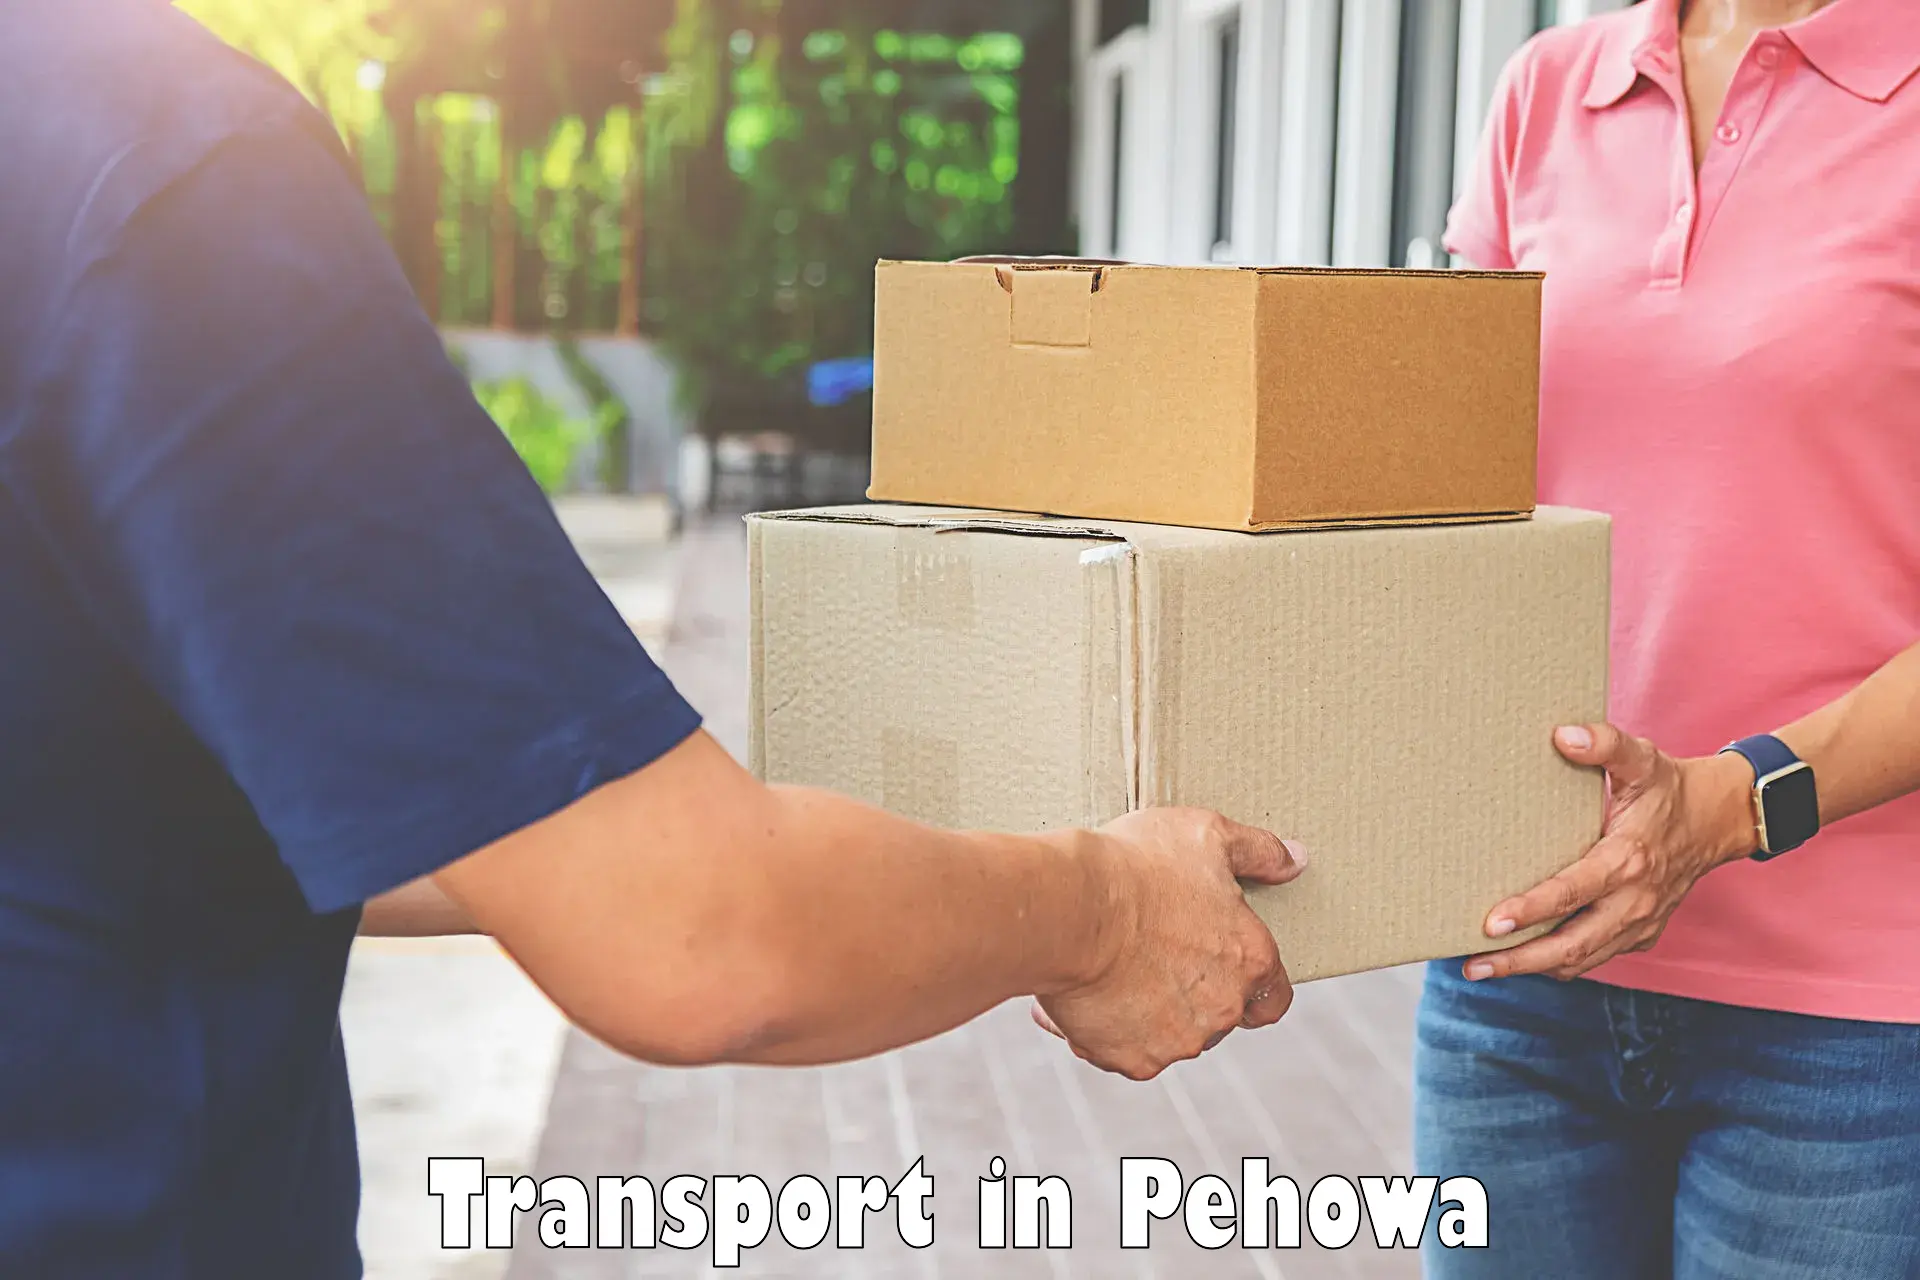 Cycle transportation service in Pehowa